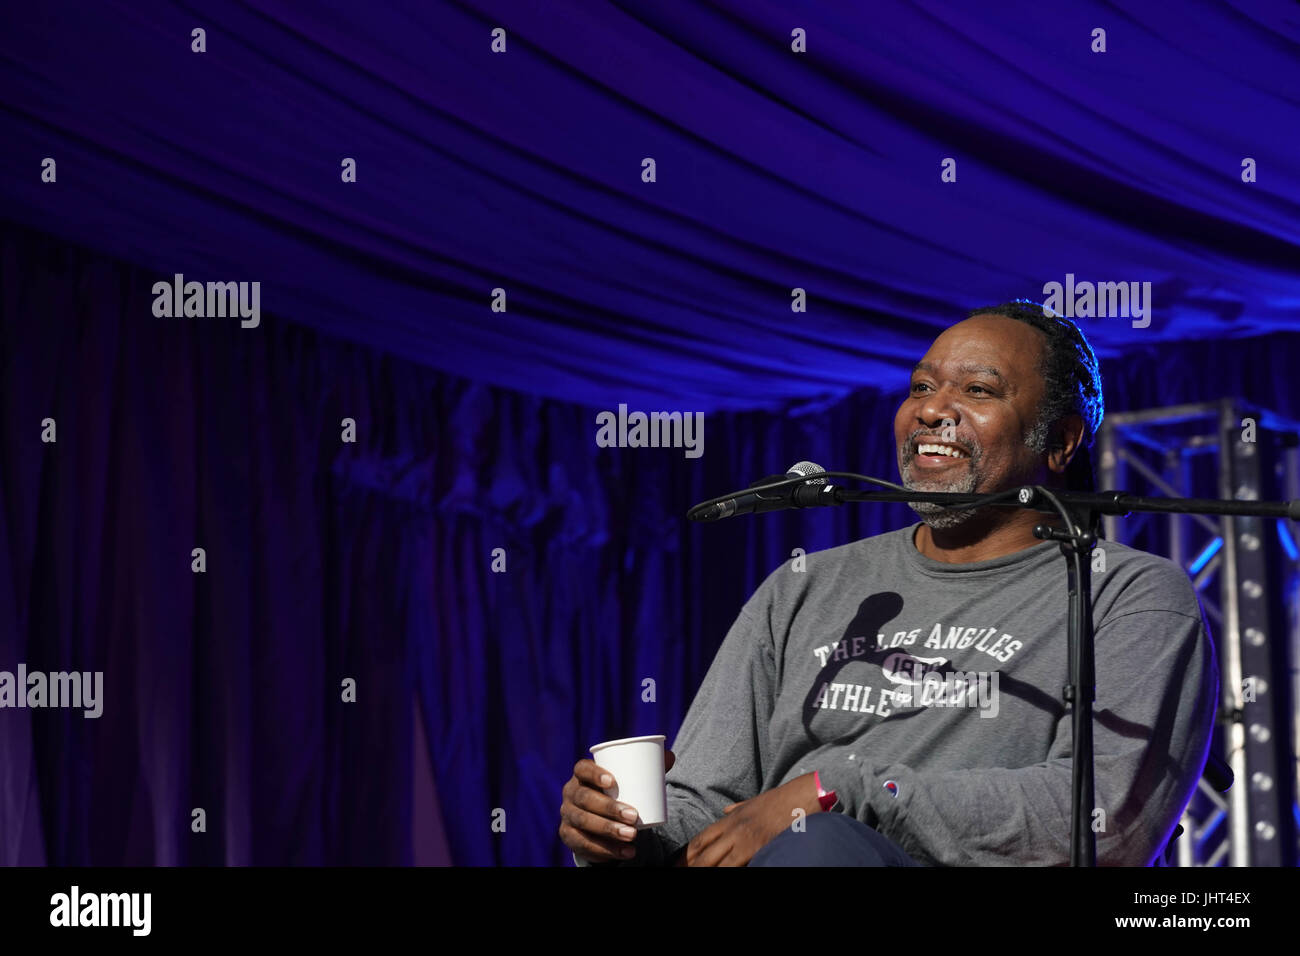 Suffolk, UK. 15th July, 2017. Reginald D Hunter performing live on the Comedy stage at the 2017 Latitude festival in Henham Park, Southwold in Suffolk. Photo date: Saturday, July 15, 2017. Photo credit should read: Roger Garfield/Alamy Live News. Stock Photo